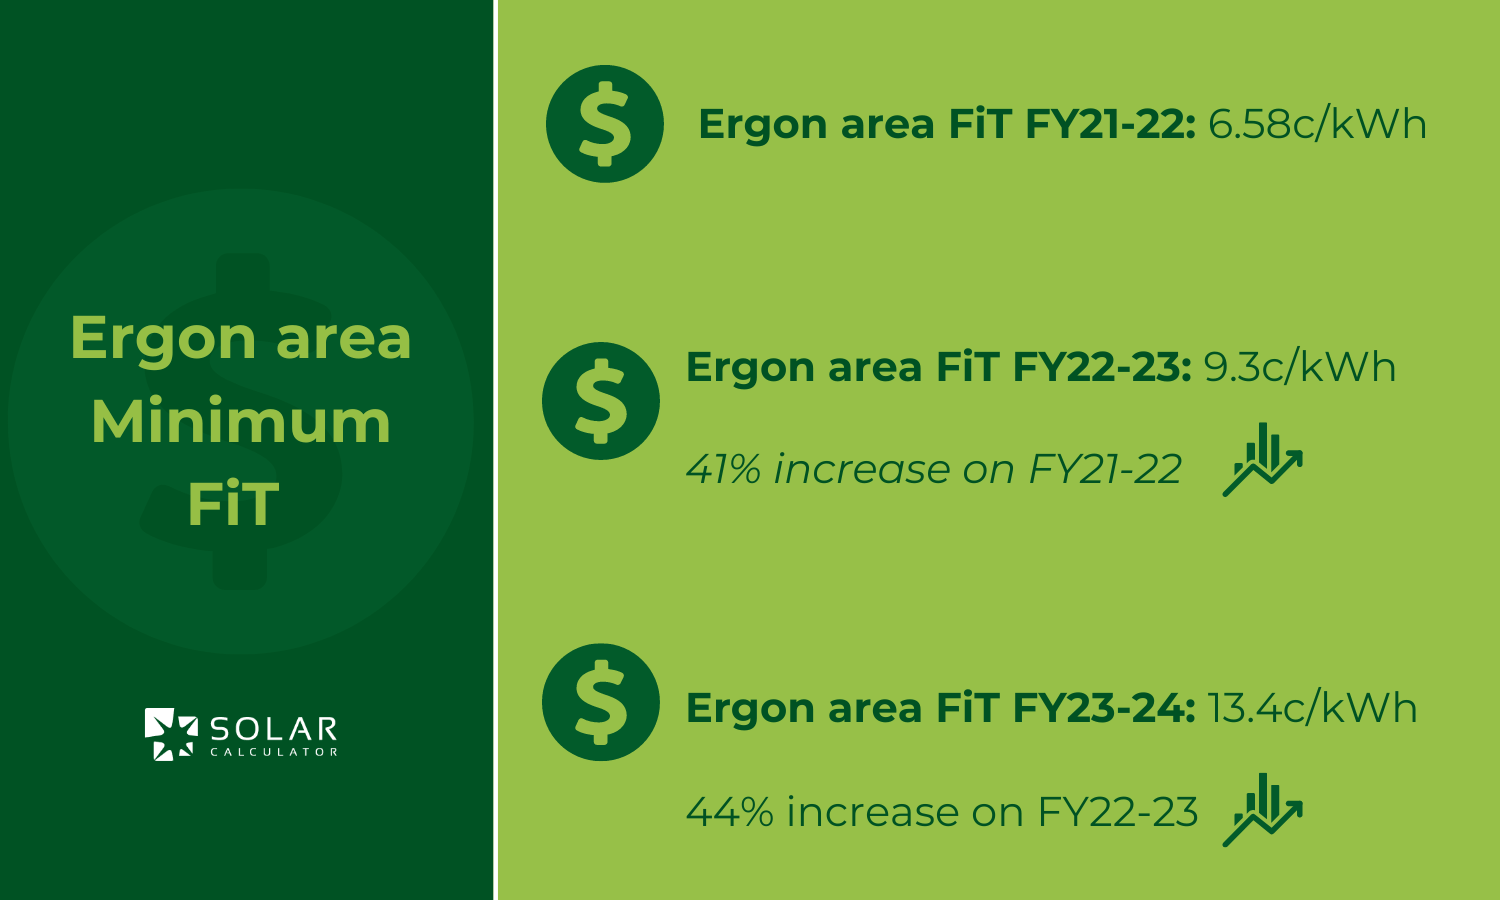 ergon area fit by year QLD